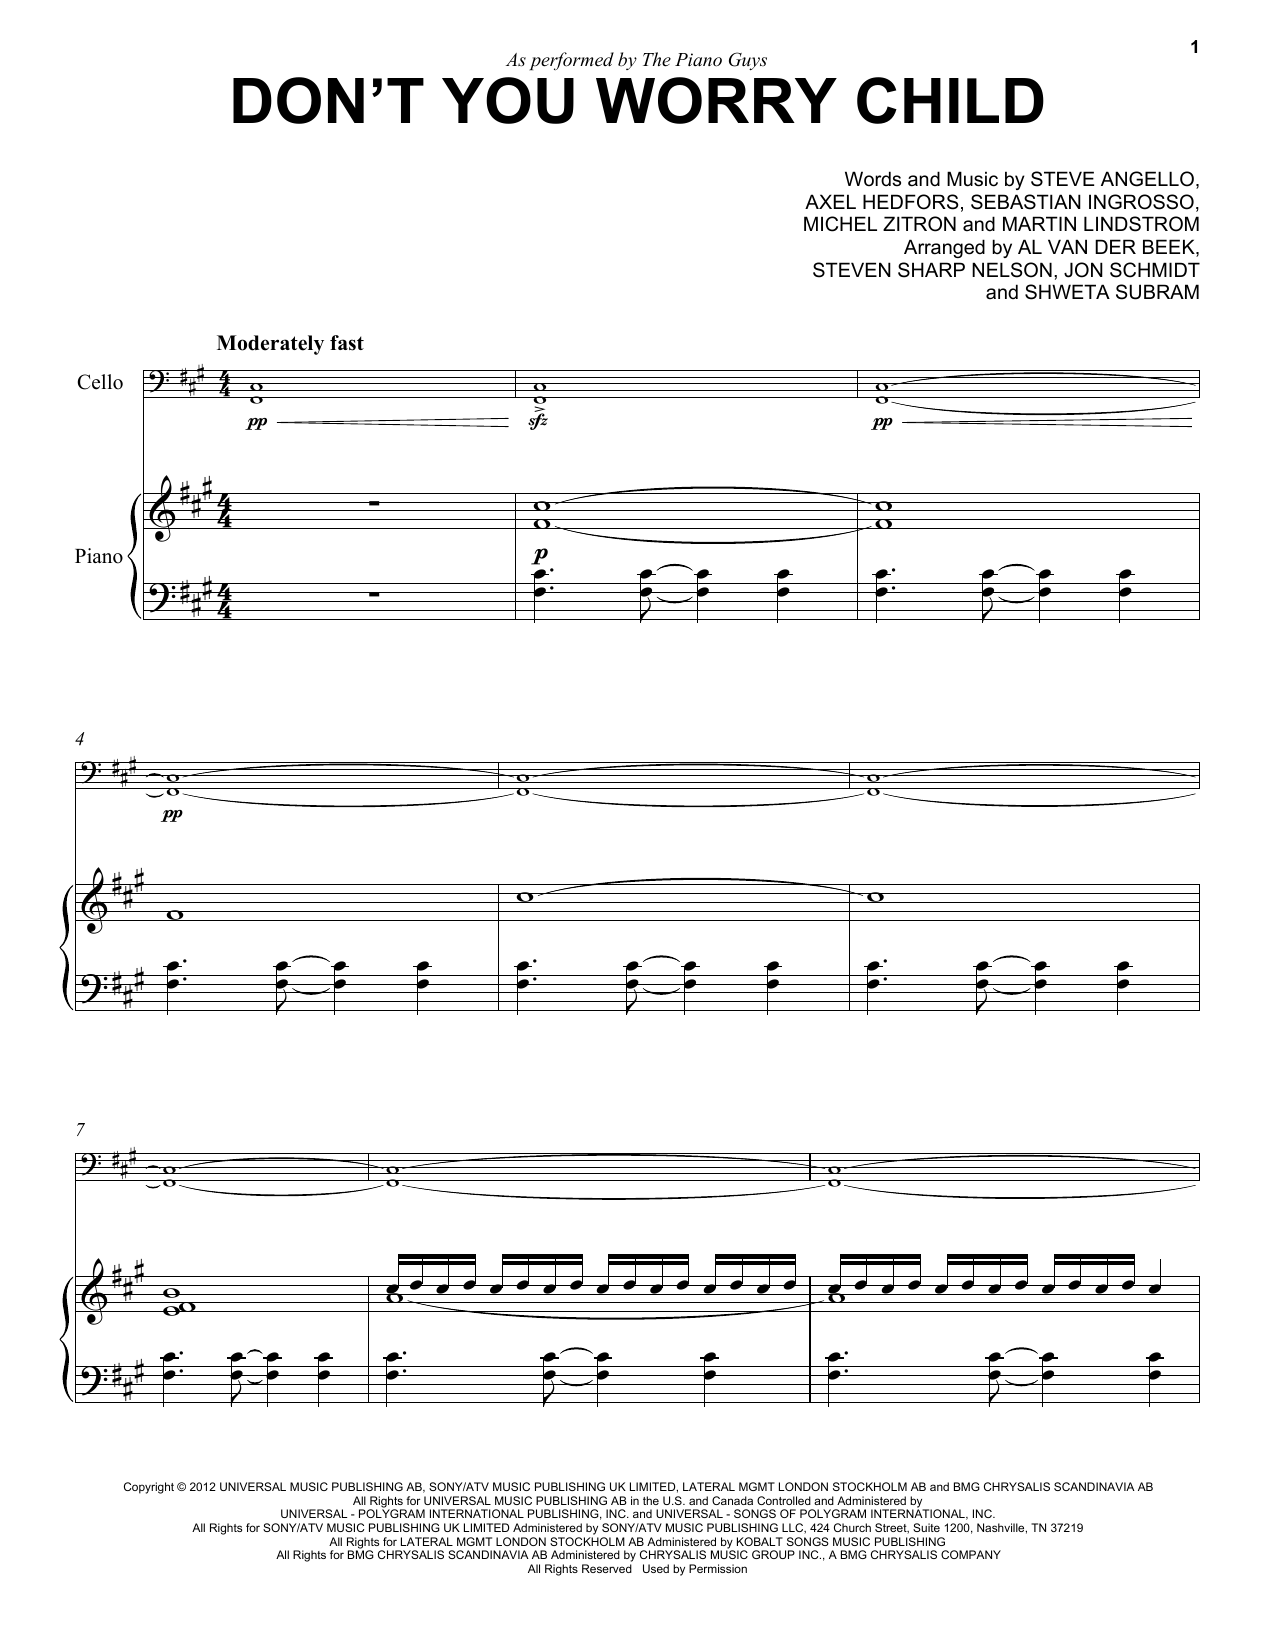 Download The Piano Guys Don't You Worry Child Sheet Music